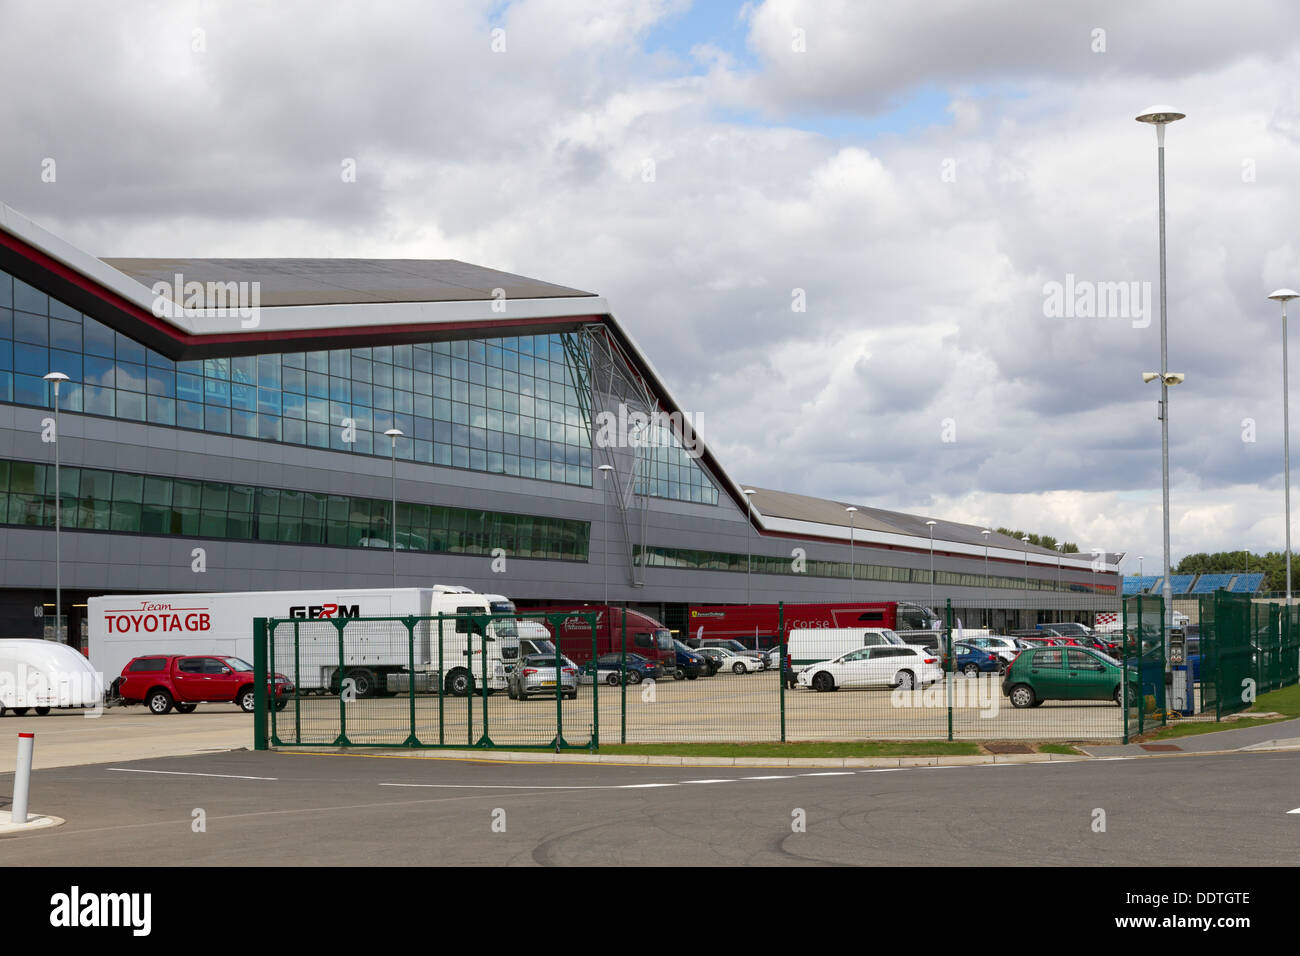 The Wing building at Silverstone Racing Circuit, housing pits, paddock, media and conferencing facilities. Stock Photo